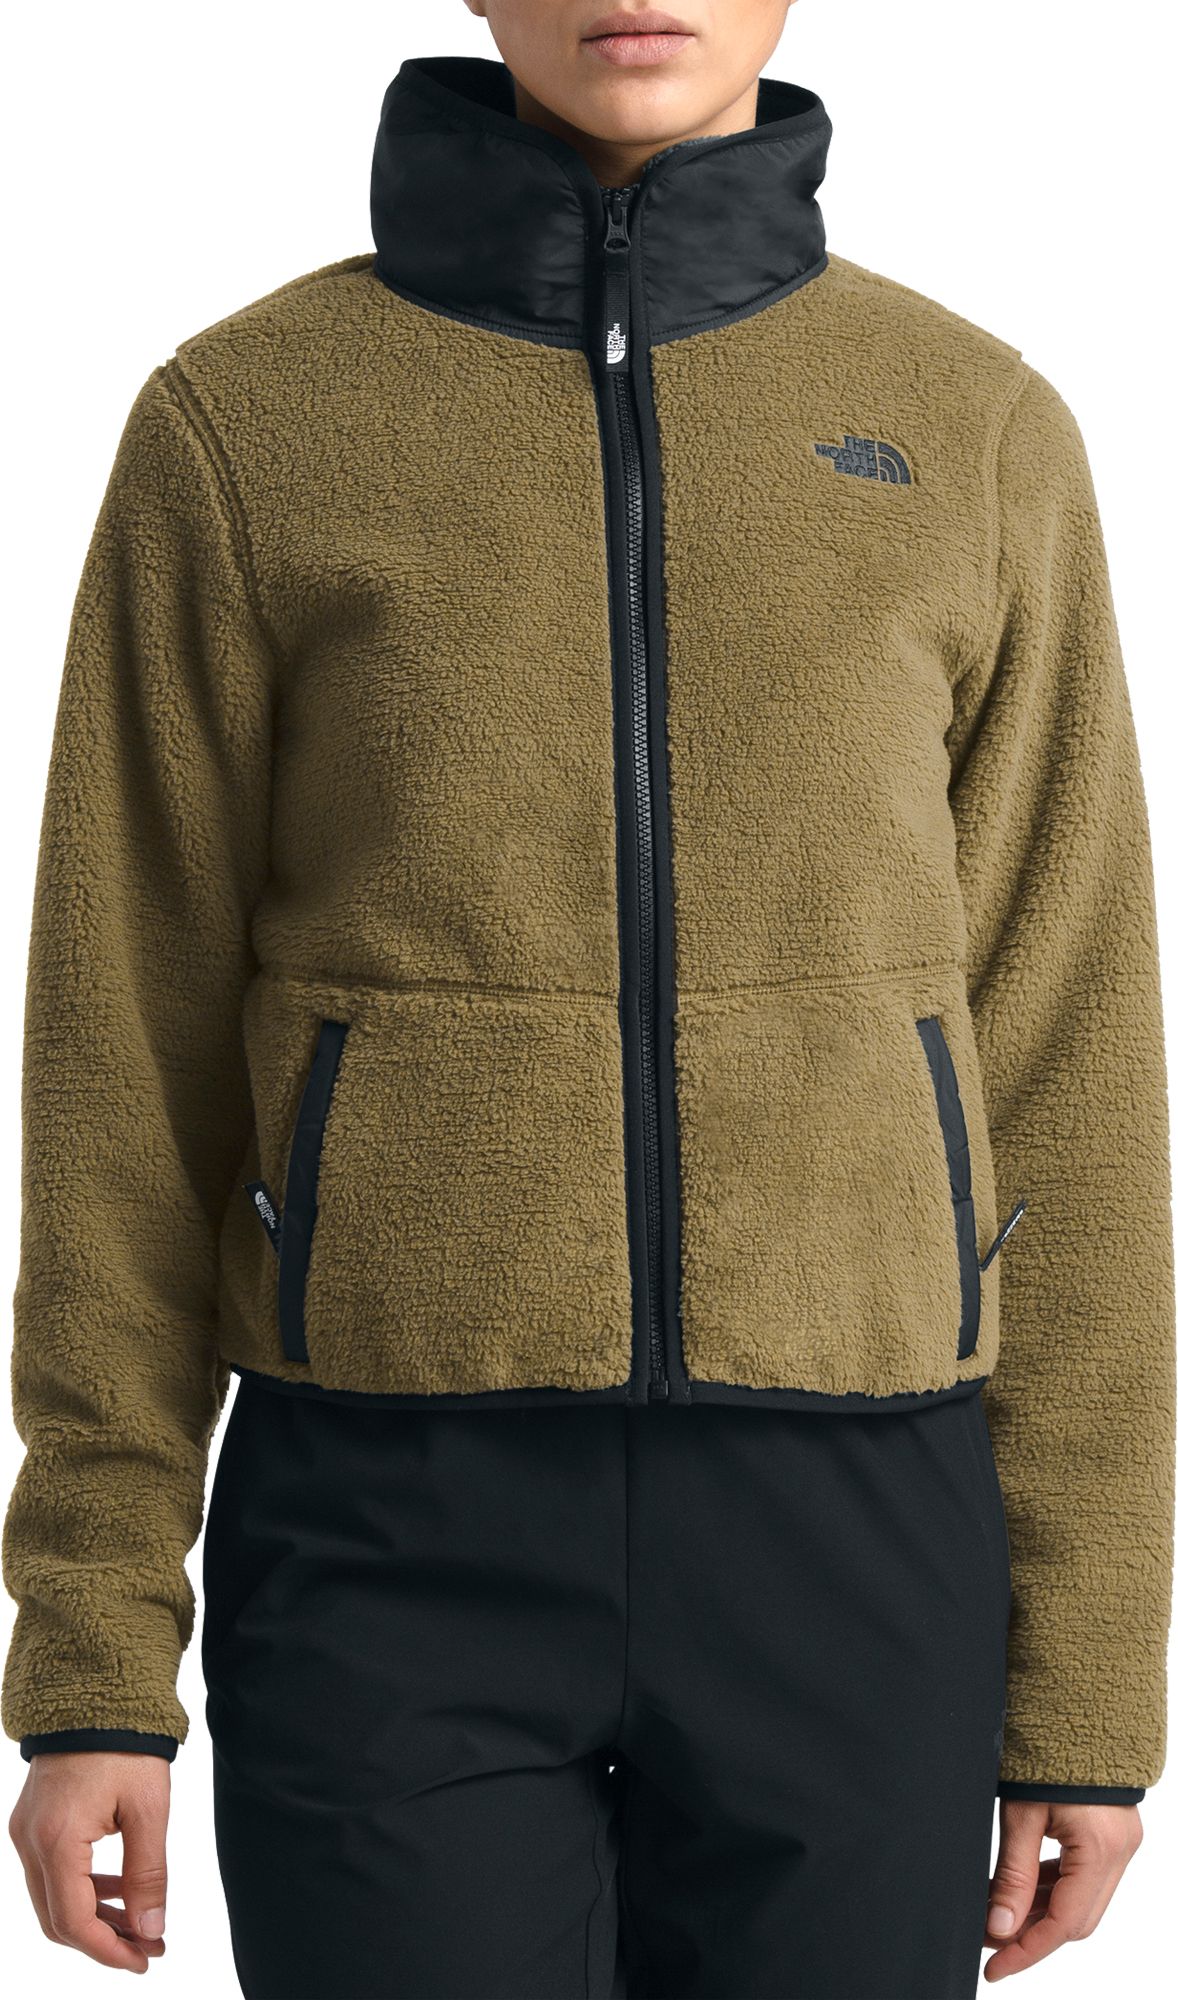 sherpa the north face Online Shopping 